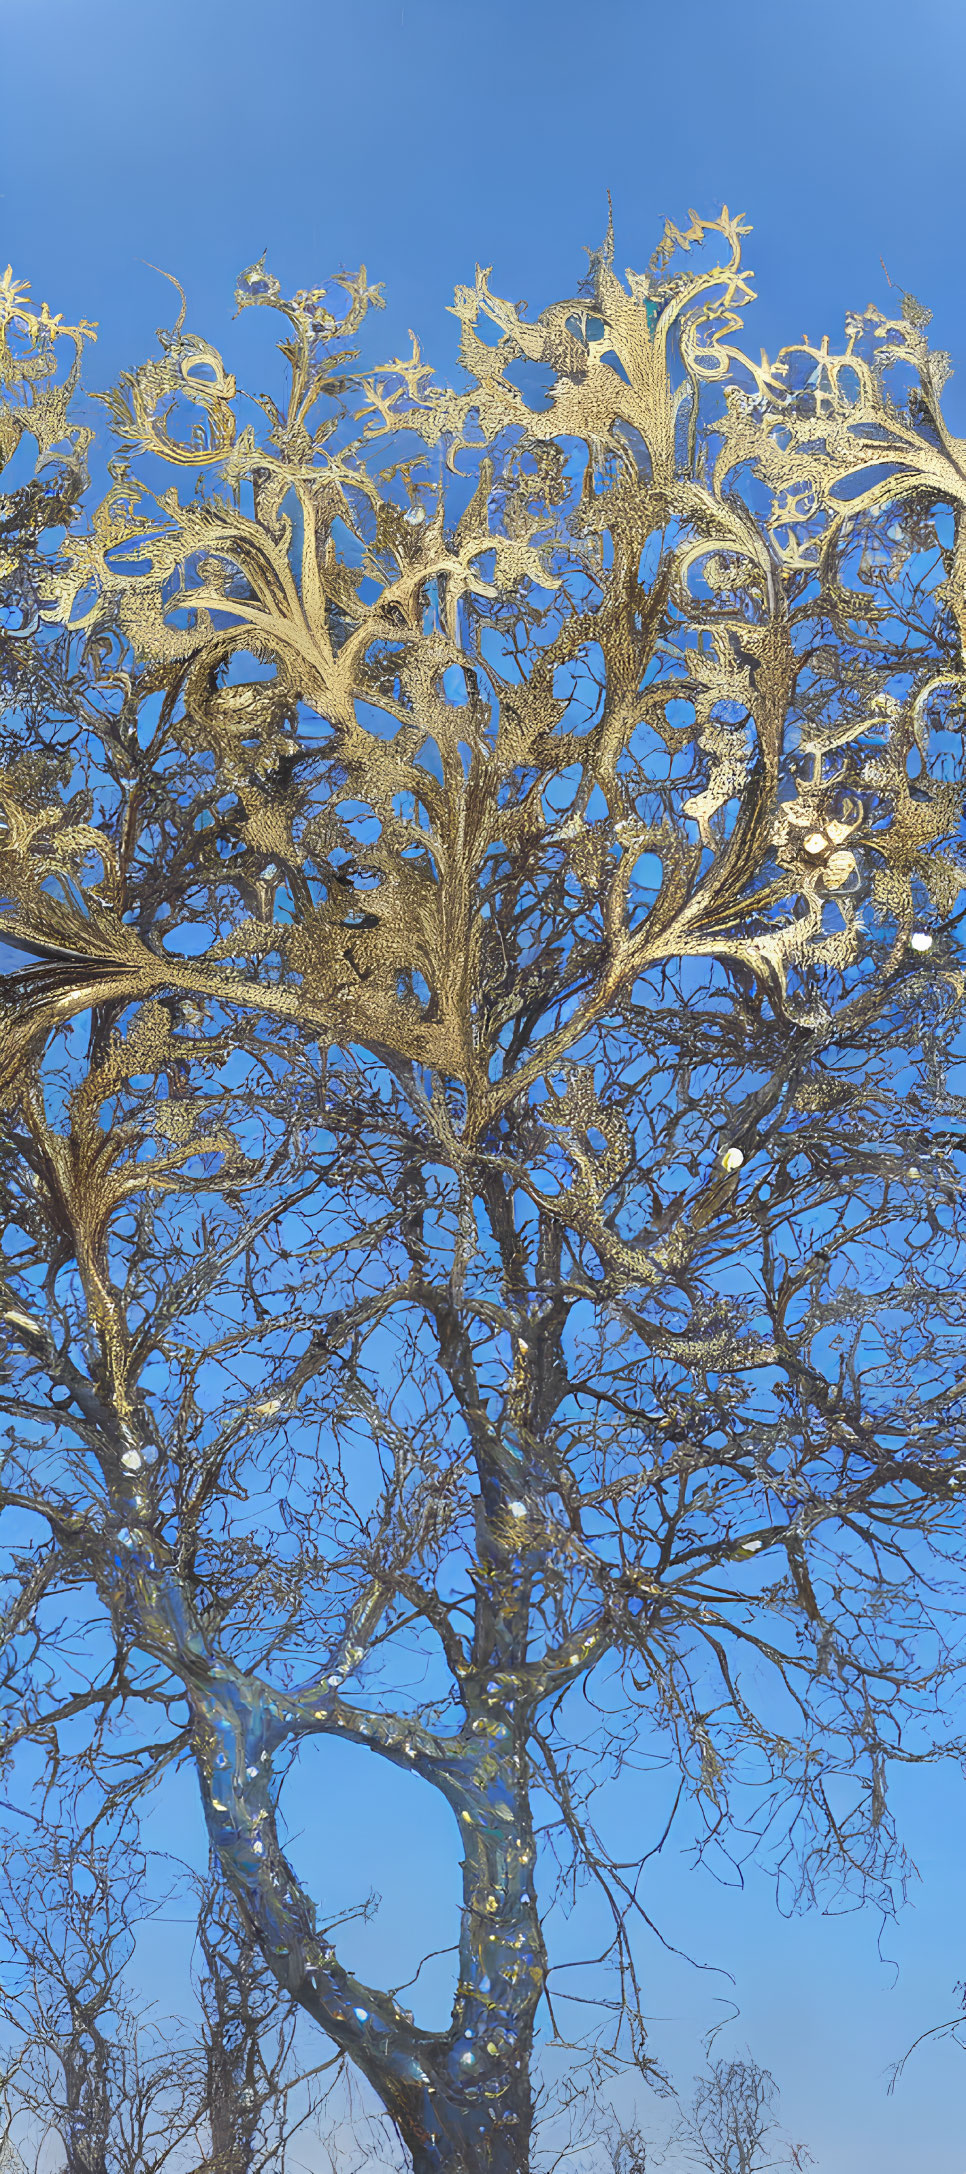 Surreal digitally-altered tree with golden patterns against blue sky